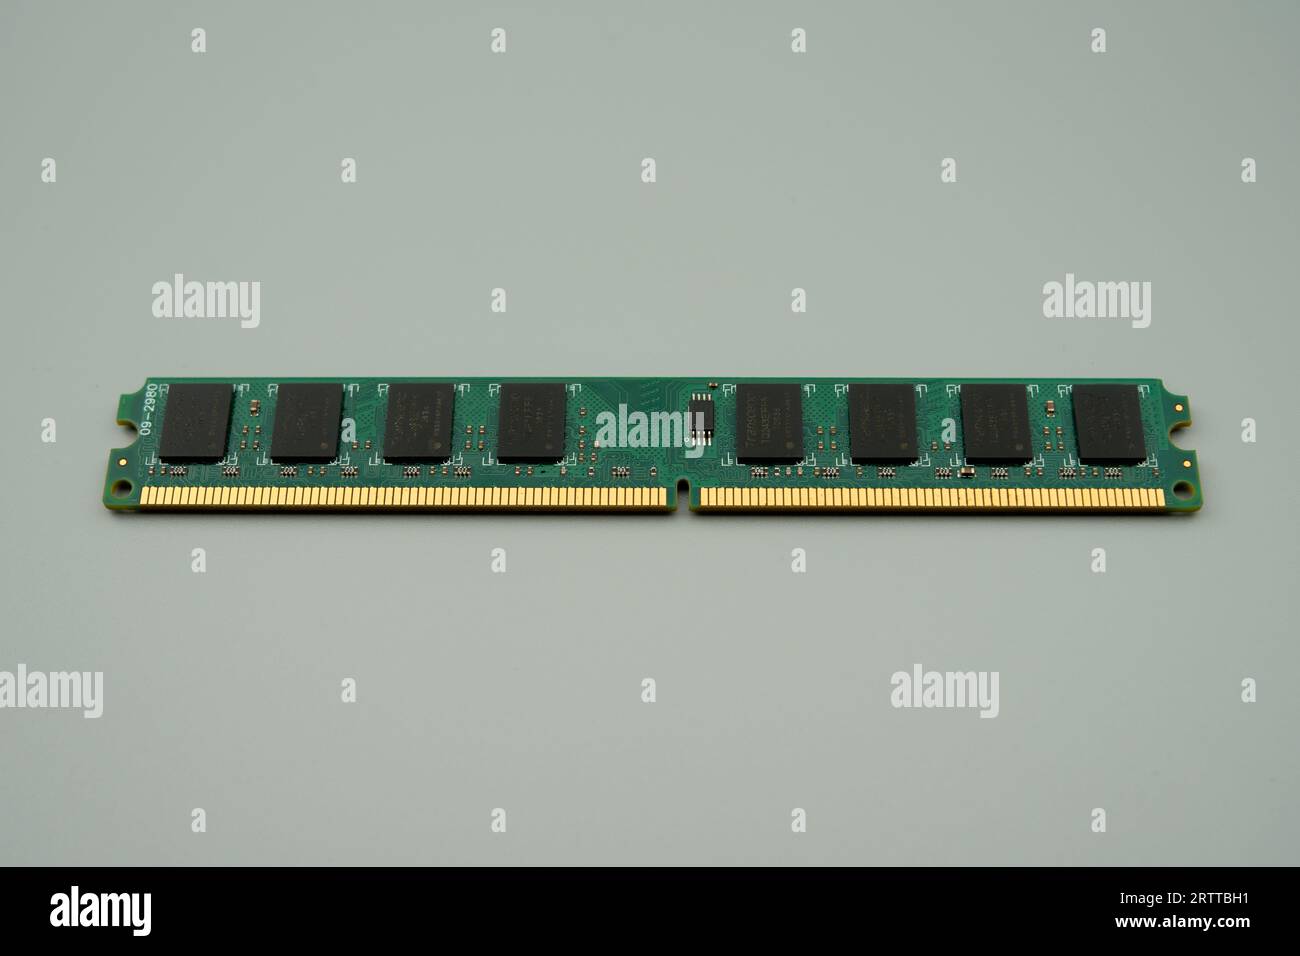 LP-type DDR2 memory on a green PCB, gray background Stock Photo